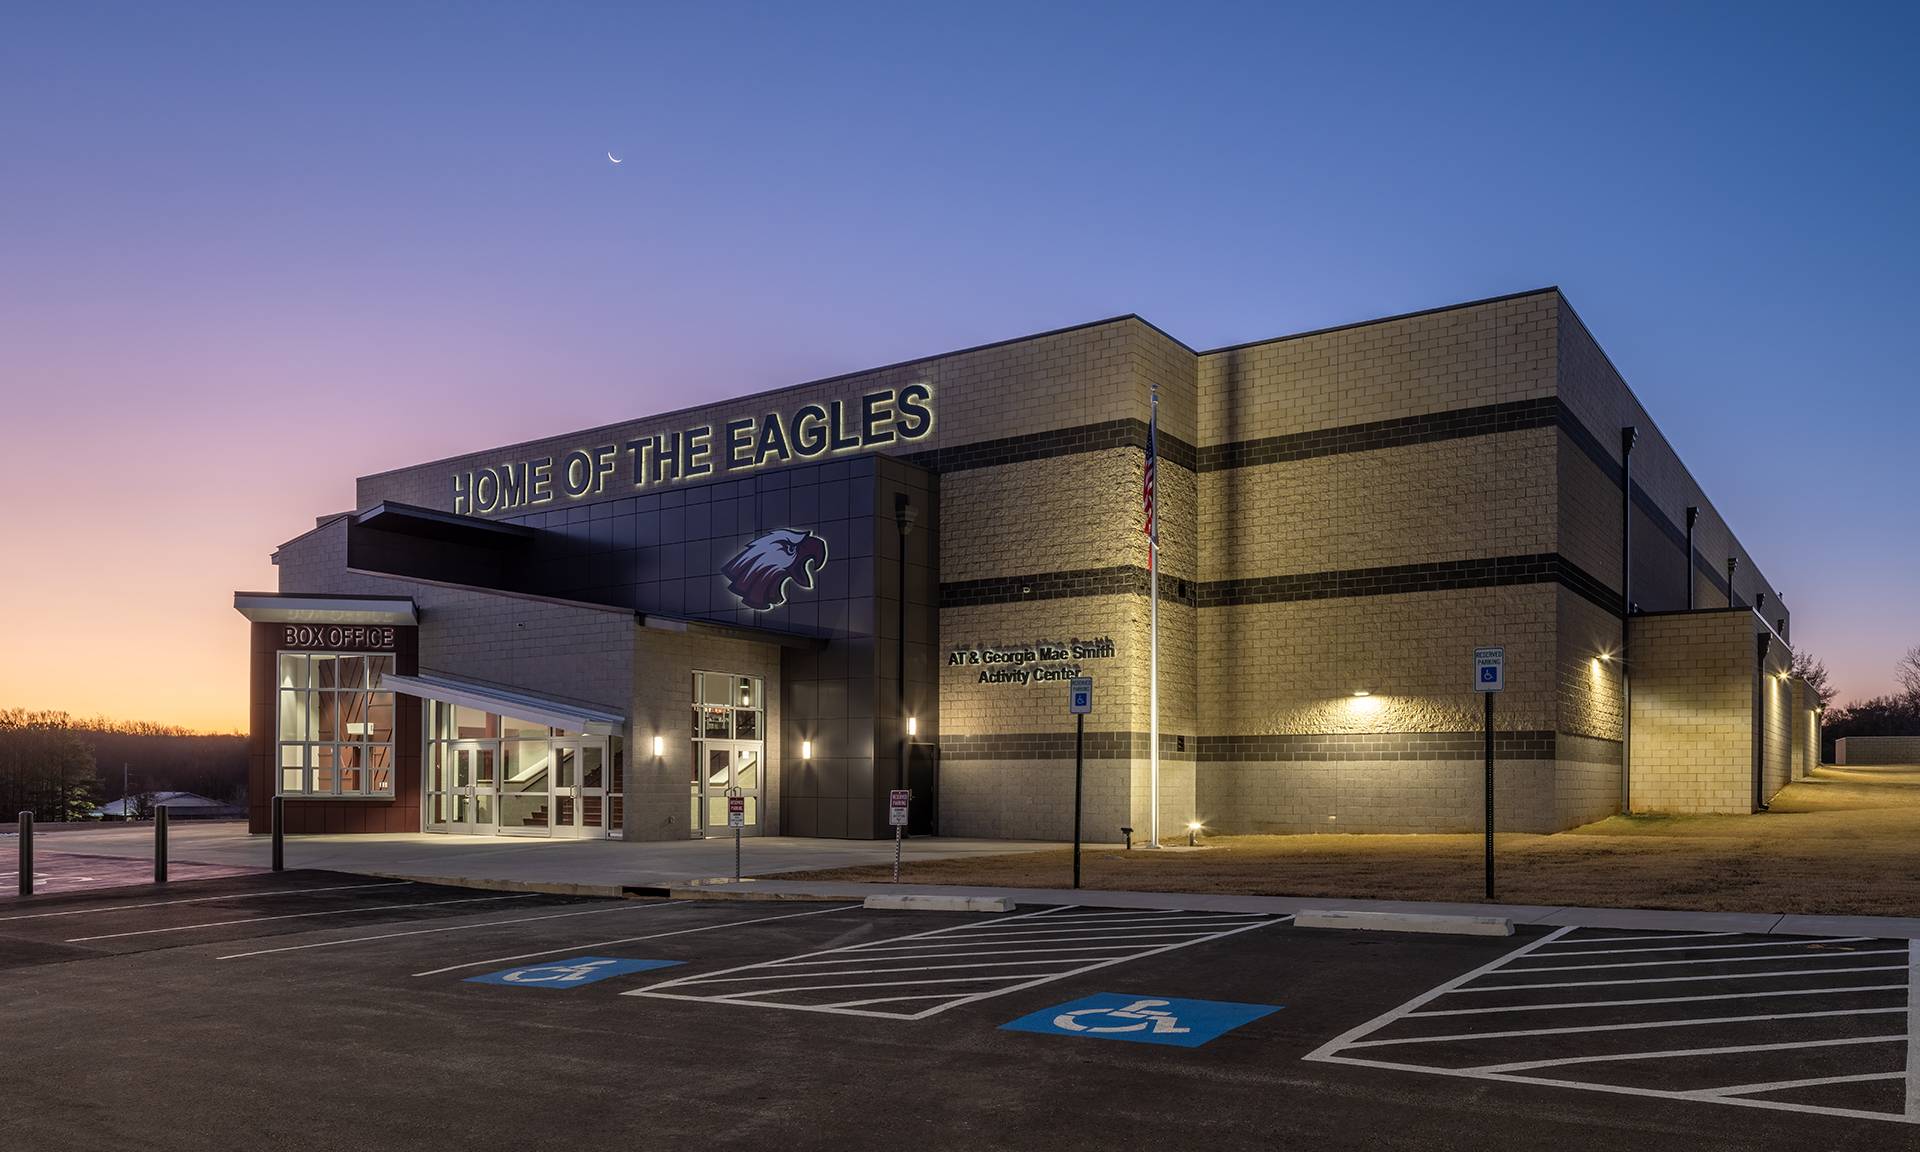 Huntsville, Arkansas school district uses Net2 to secure state-of-the-art activity center